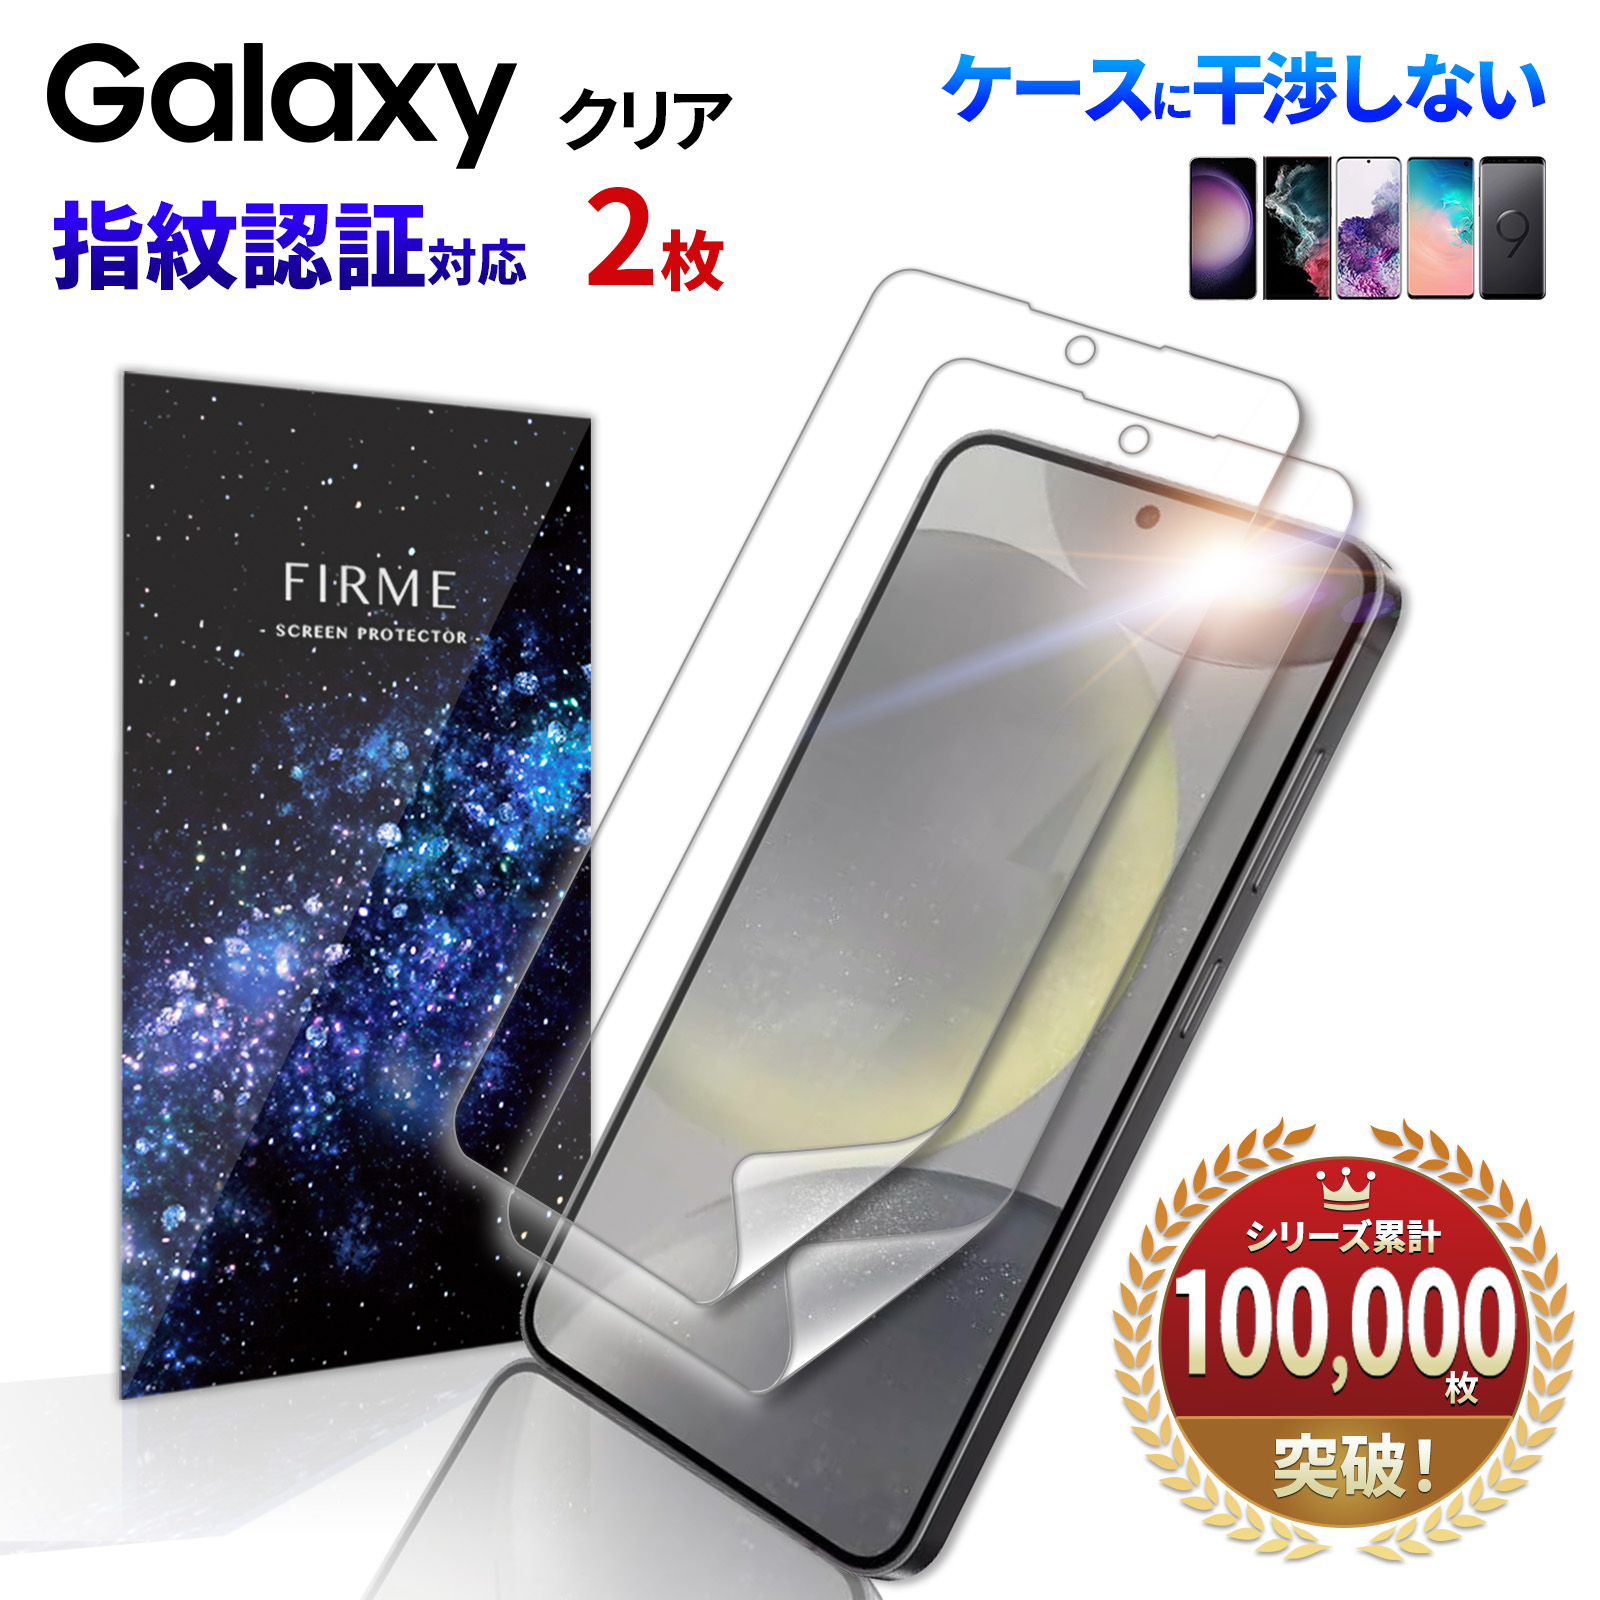 galaxy S24 Ultra フィルム s23 ultra s22 ultra s20 s10 s22 s21 s9 s10 s8 指紋認証 保護 note10 + sc03l 5g 衝撃吸収 透明 クリア ウレタン｜mywaysmart